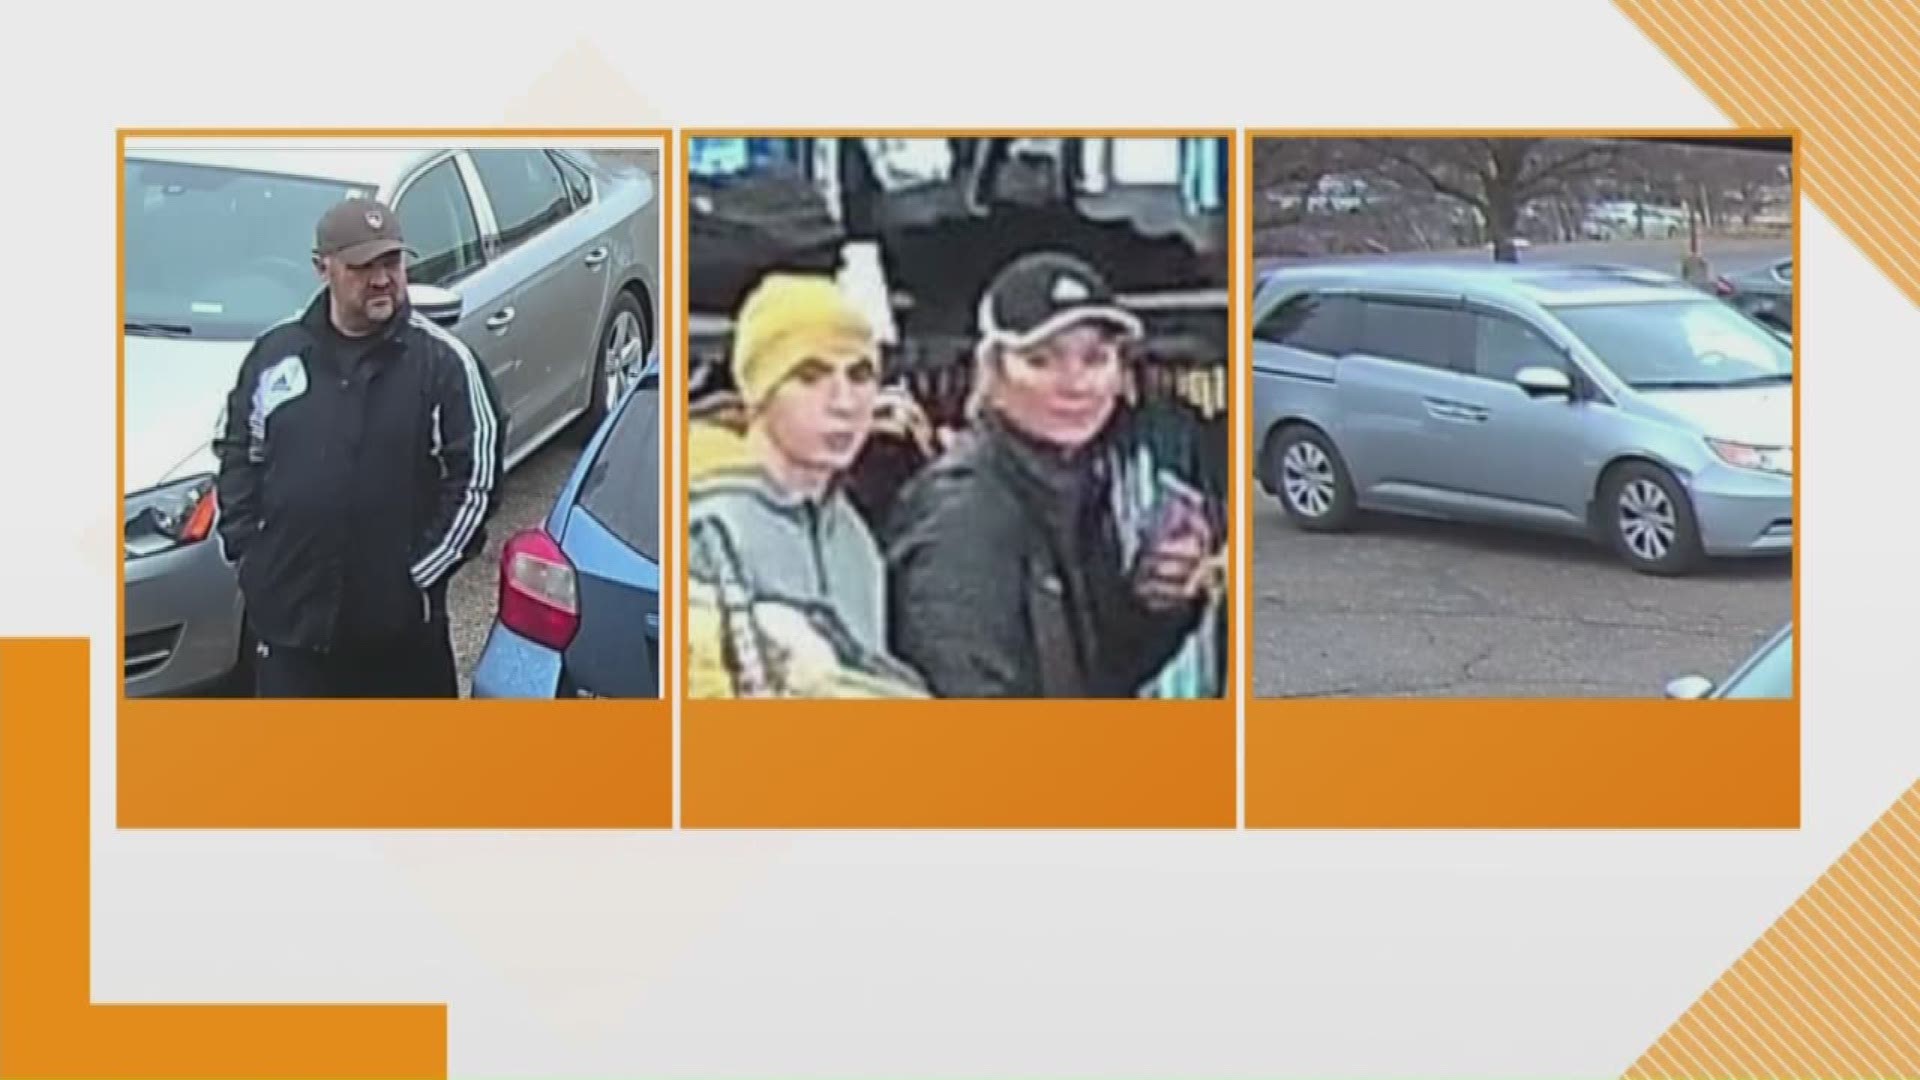 The Kent County Sheriff’s Office is asking for the public's help to find three people involved in a larceny investigation.